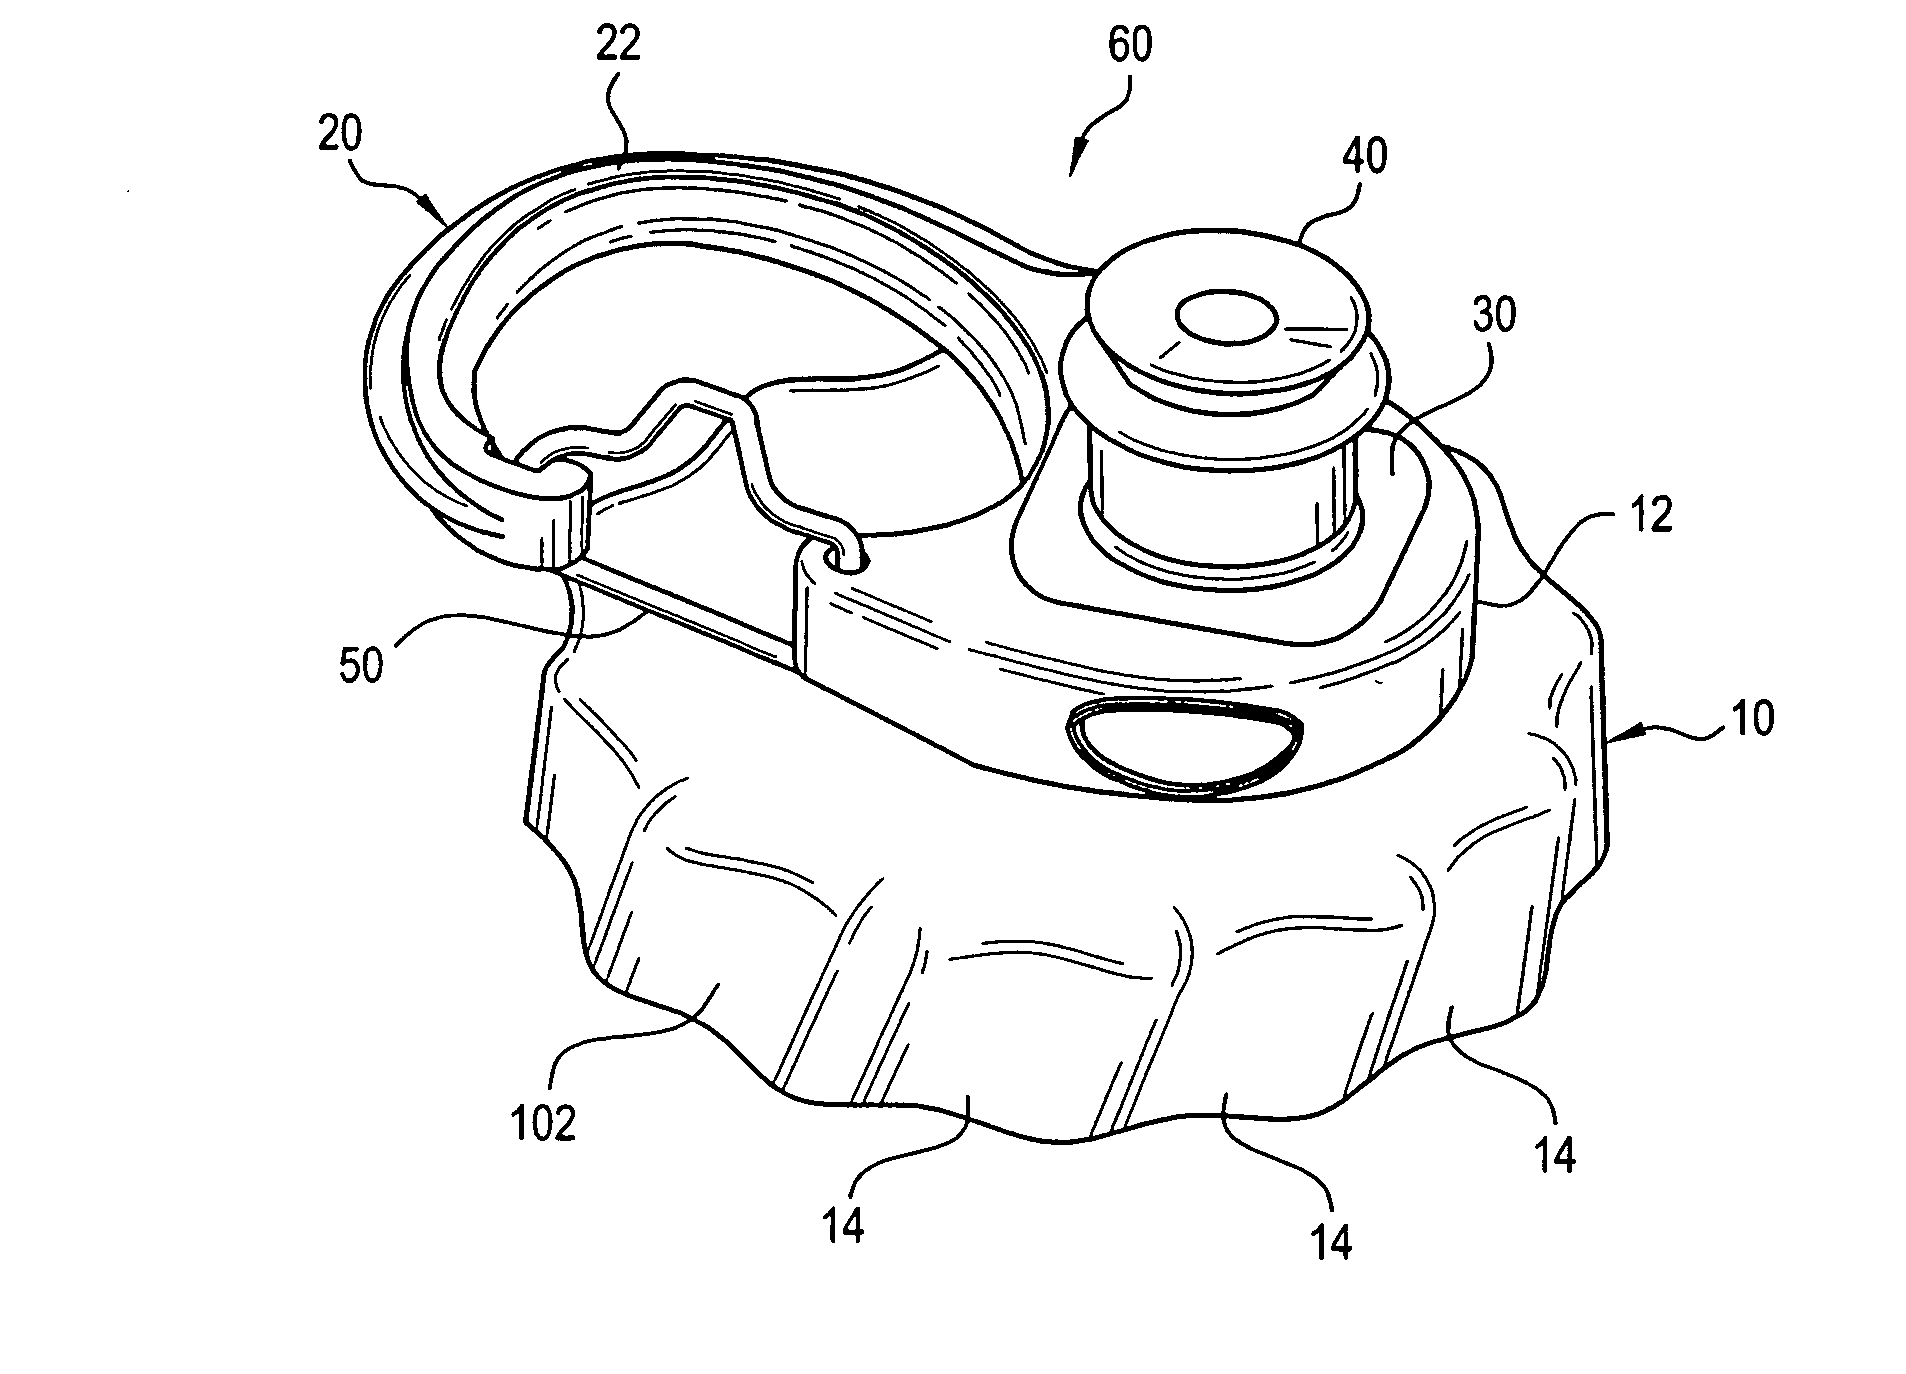 Attachable container having openable snap ring